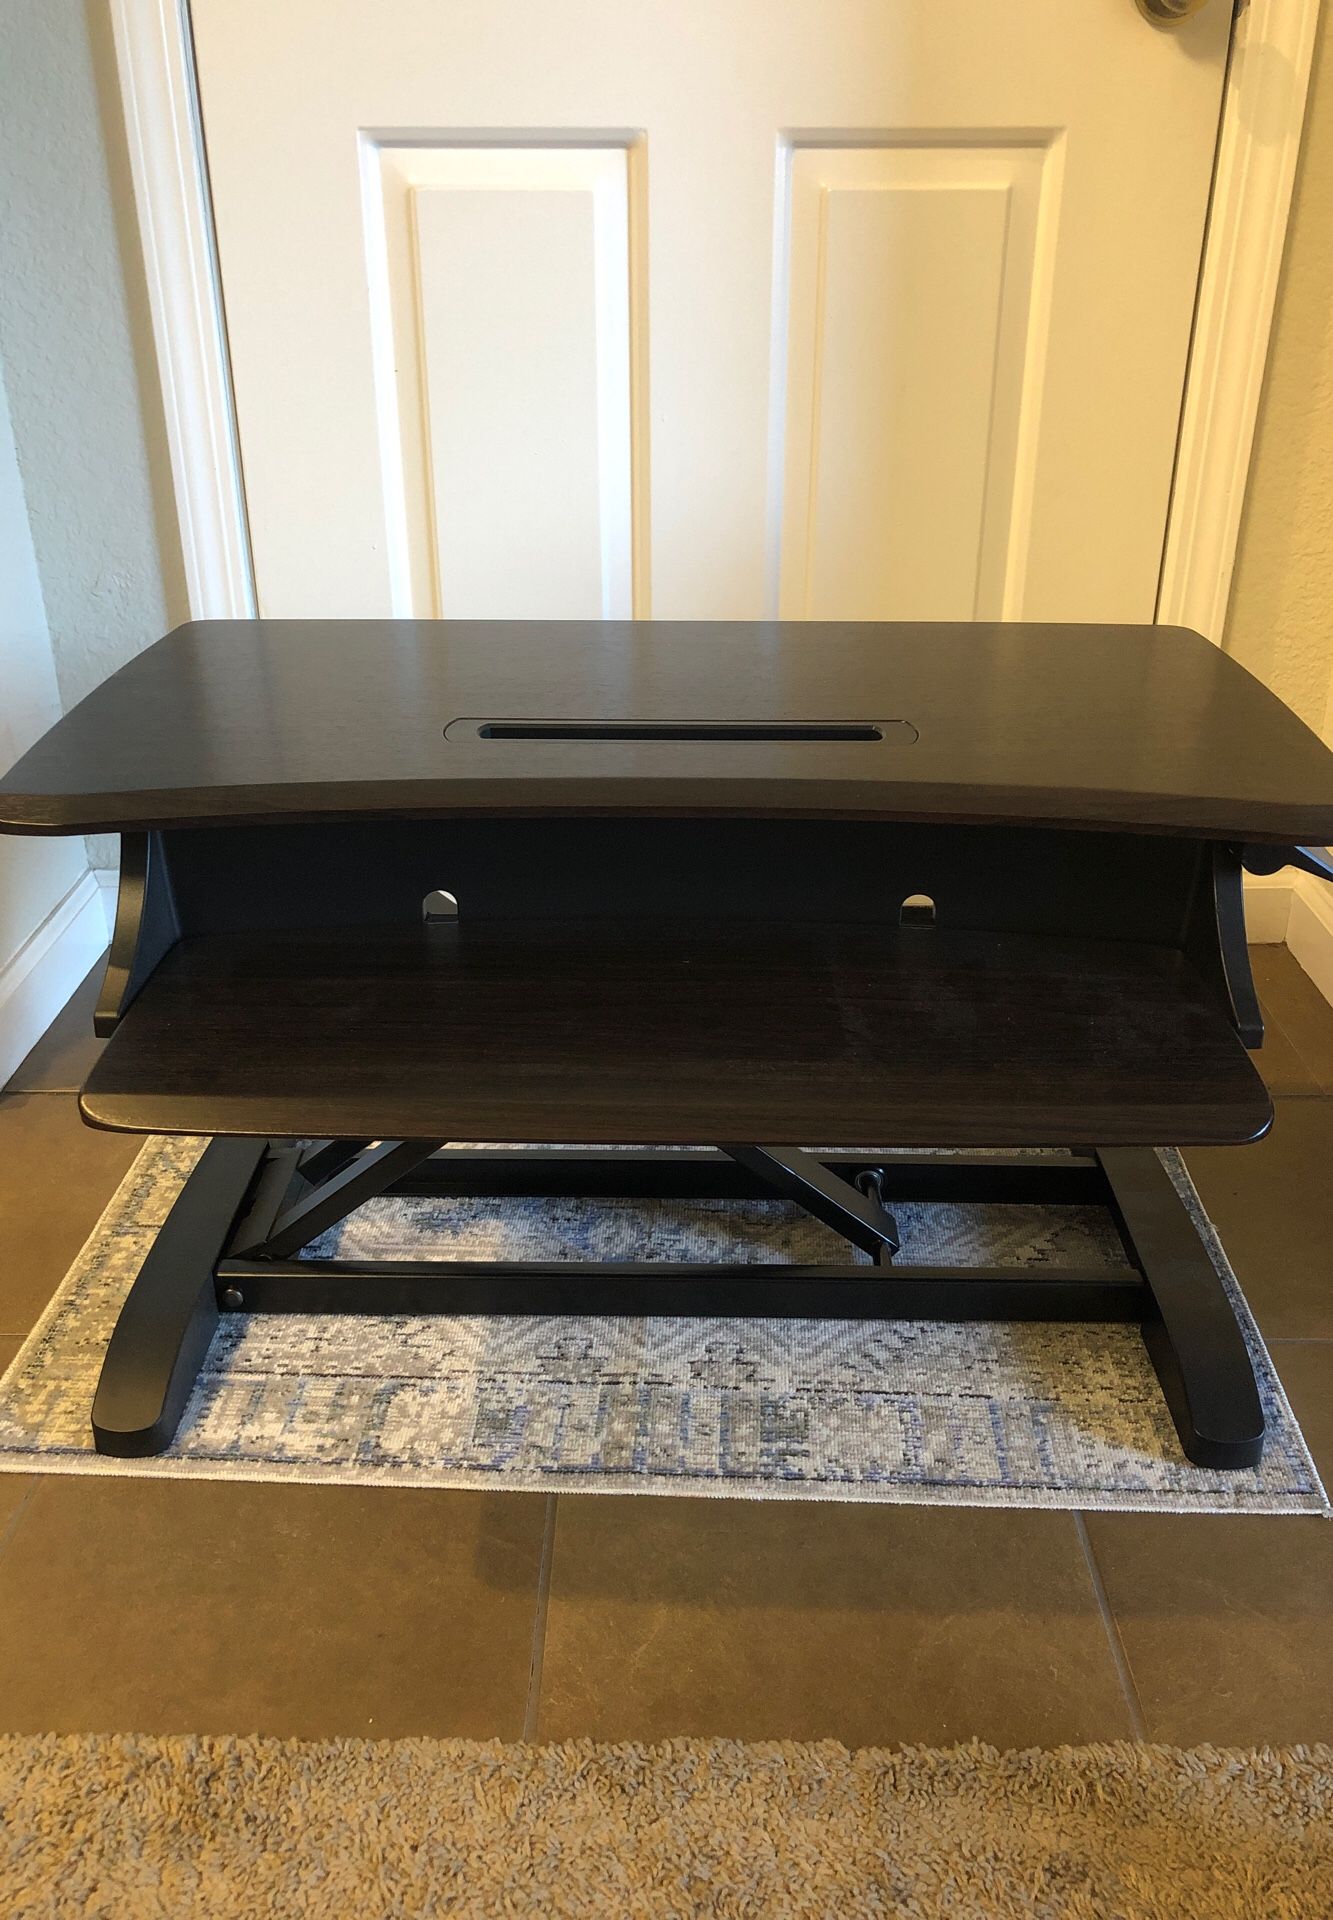 Costco - Table Top Standing Desk - 7” rises to 18” (31x23x7)